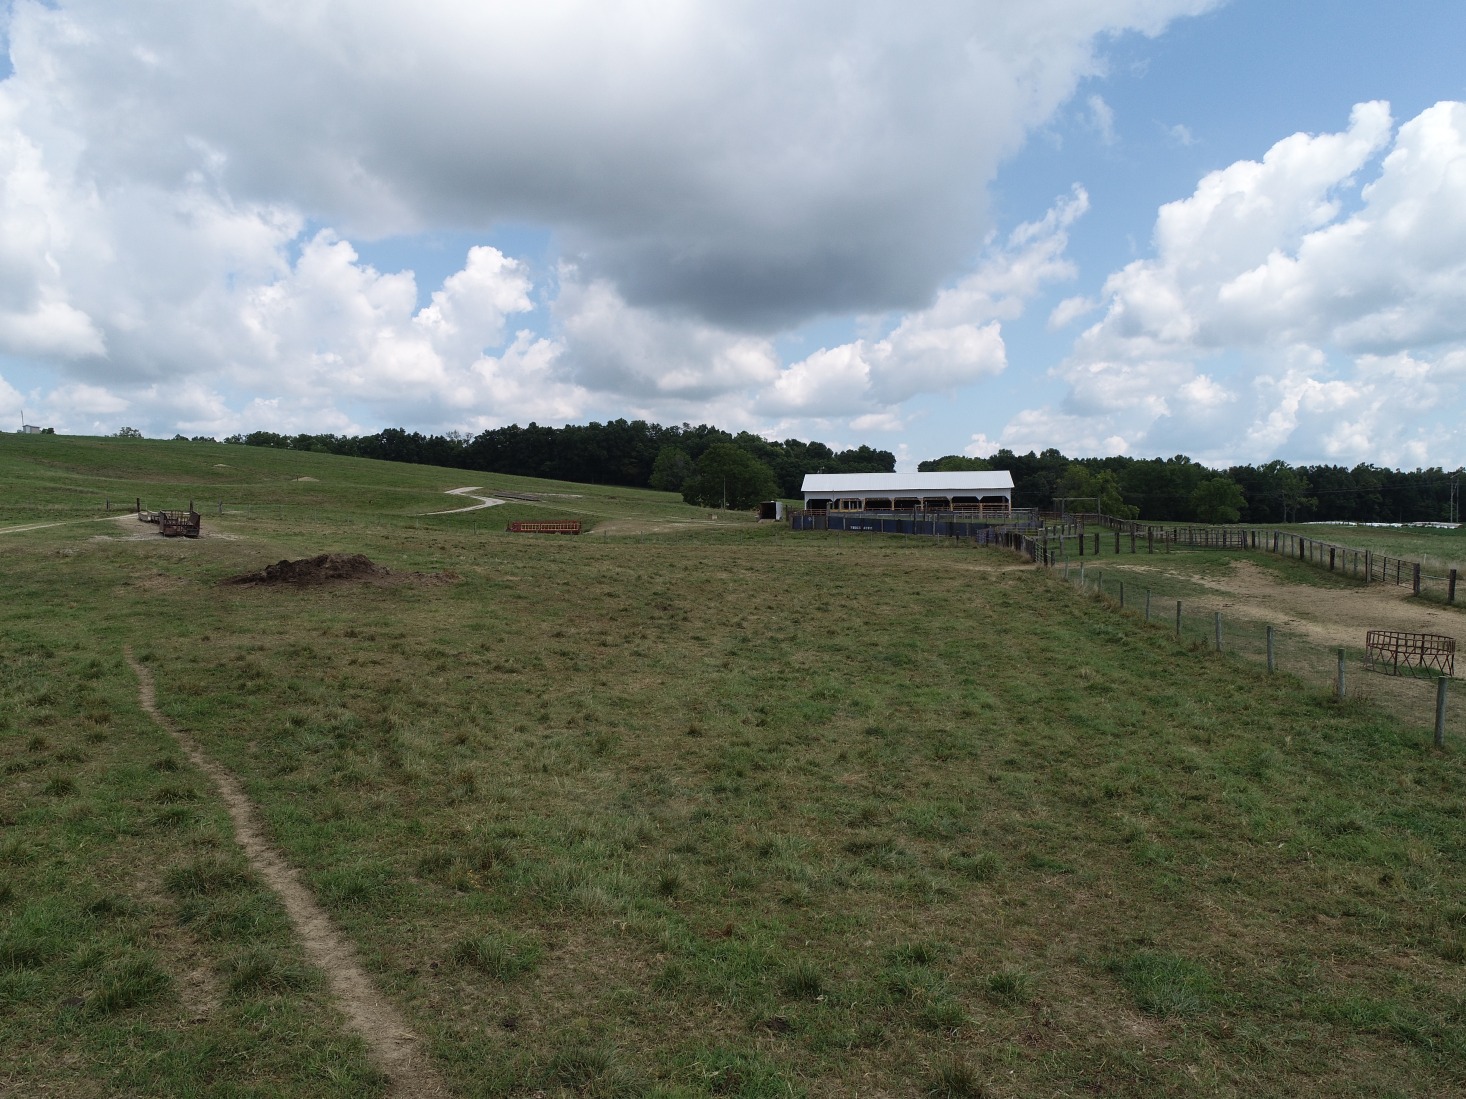 uav drone base station and barn beyond grazing area